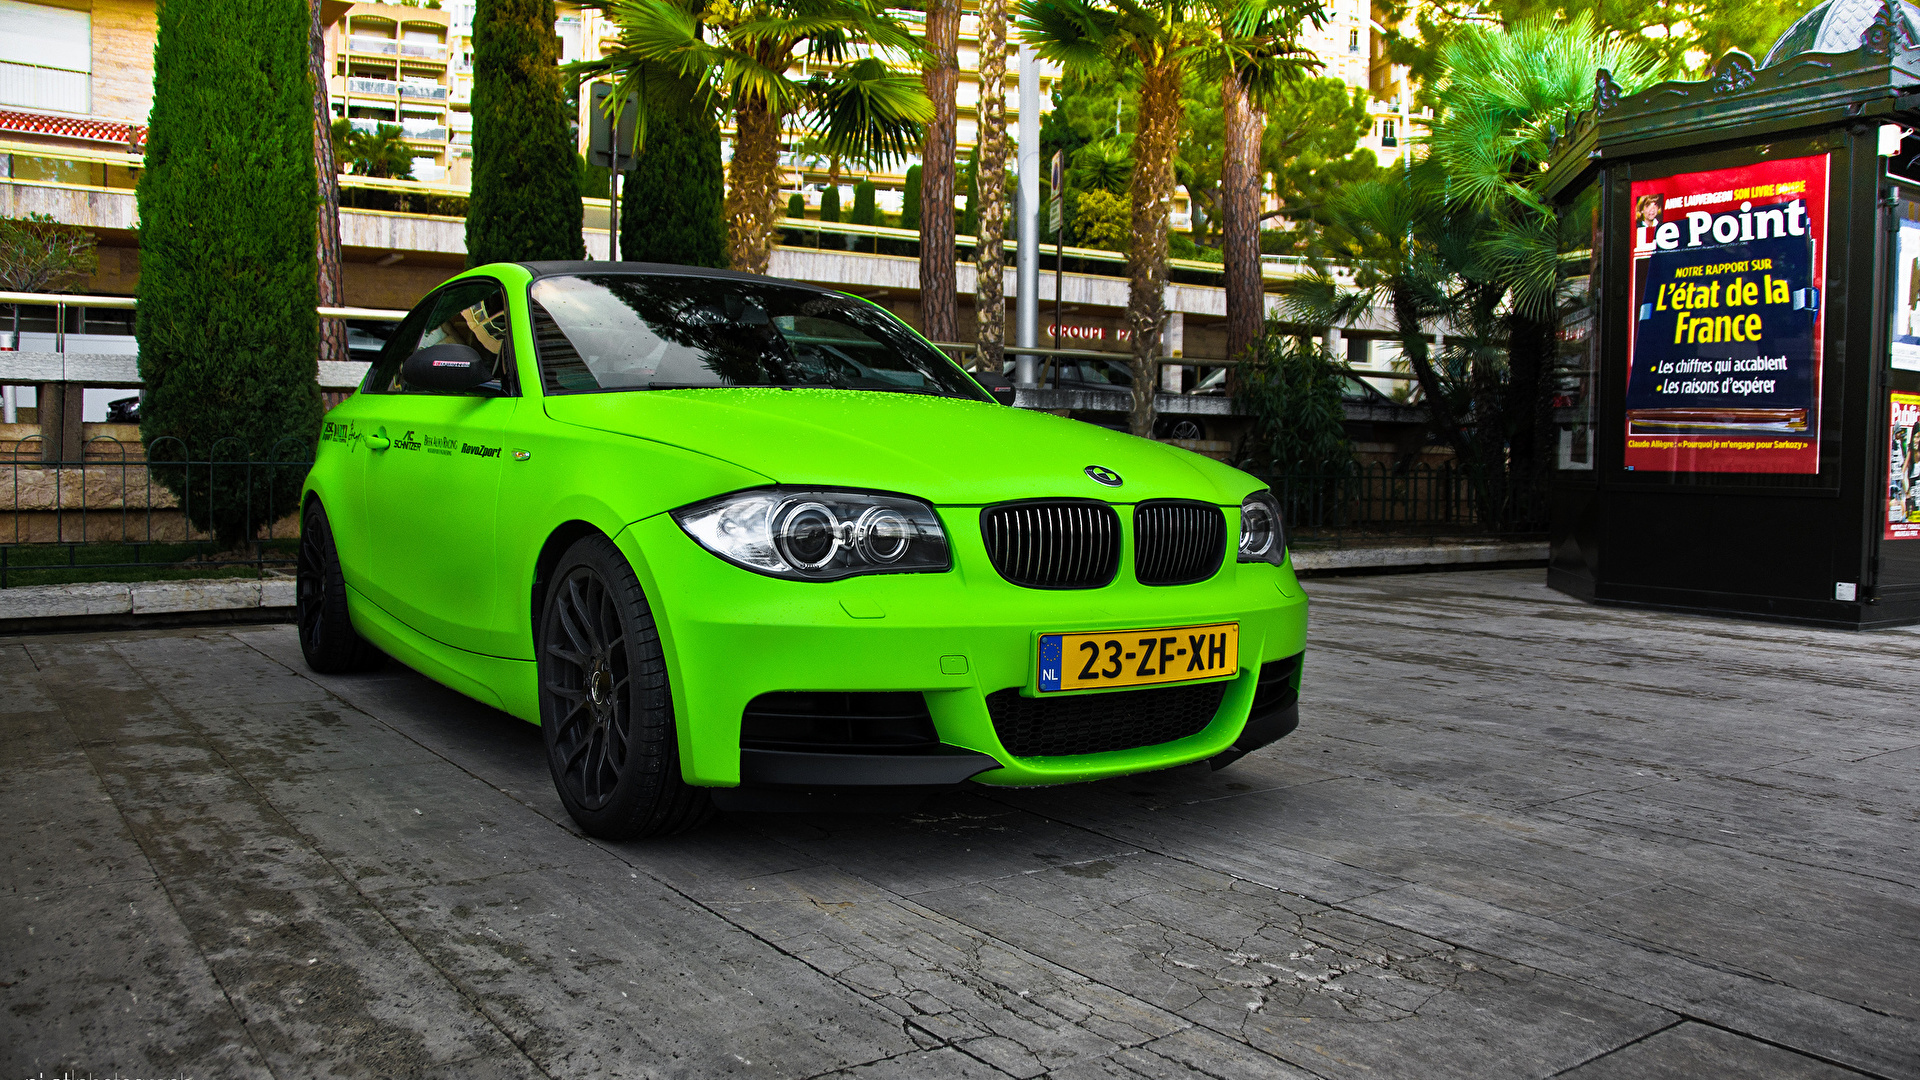 How Does The BMW 1 Series Fit Into The Luxury Car Industry  Tatler Asia